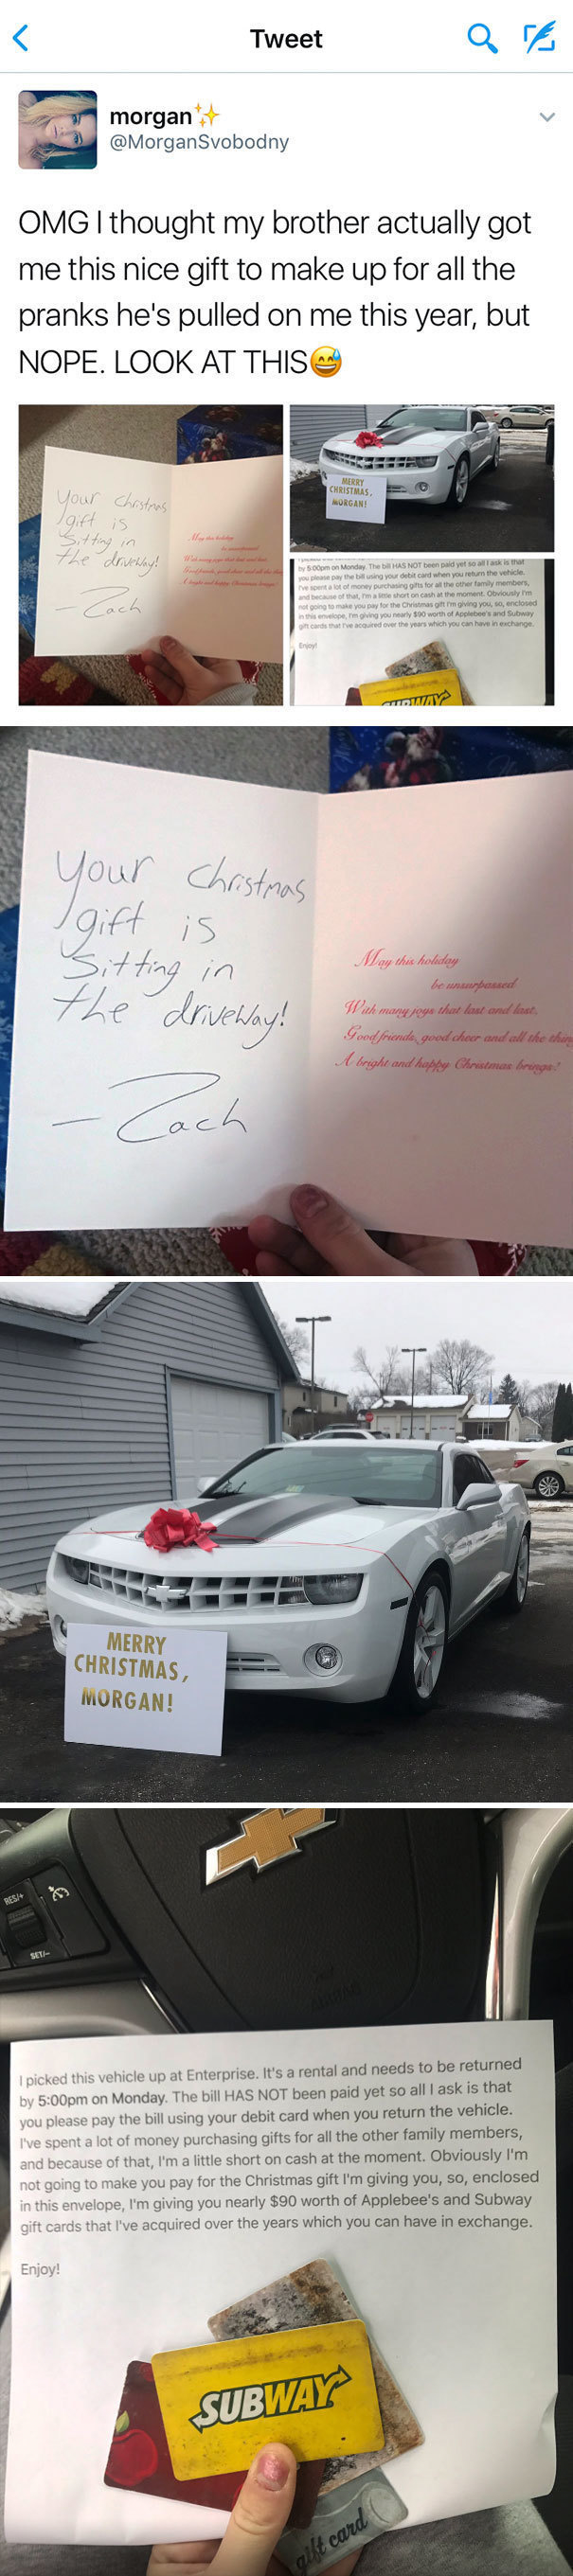 christmas troll subway - Tweet Tweet morgan Omg I thought my brother actually got me this nice gift to make up for all the pranks he's pulled on me this year, but Nope. Look At This Merry Christmas Morgan! Your Christmas gift is Sitting in the driveway! b